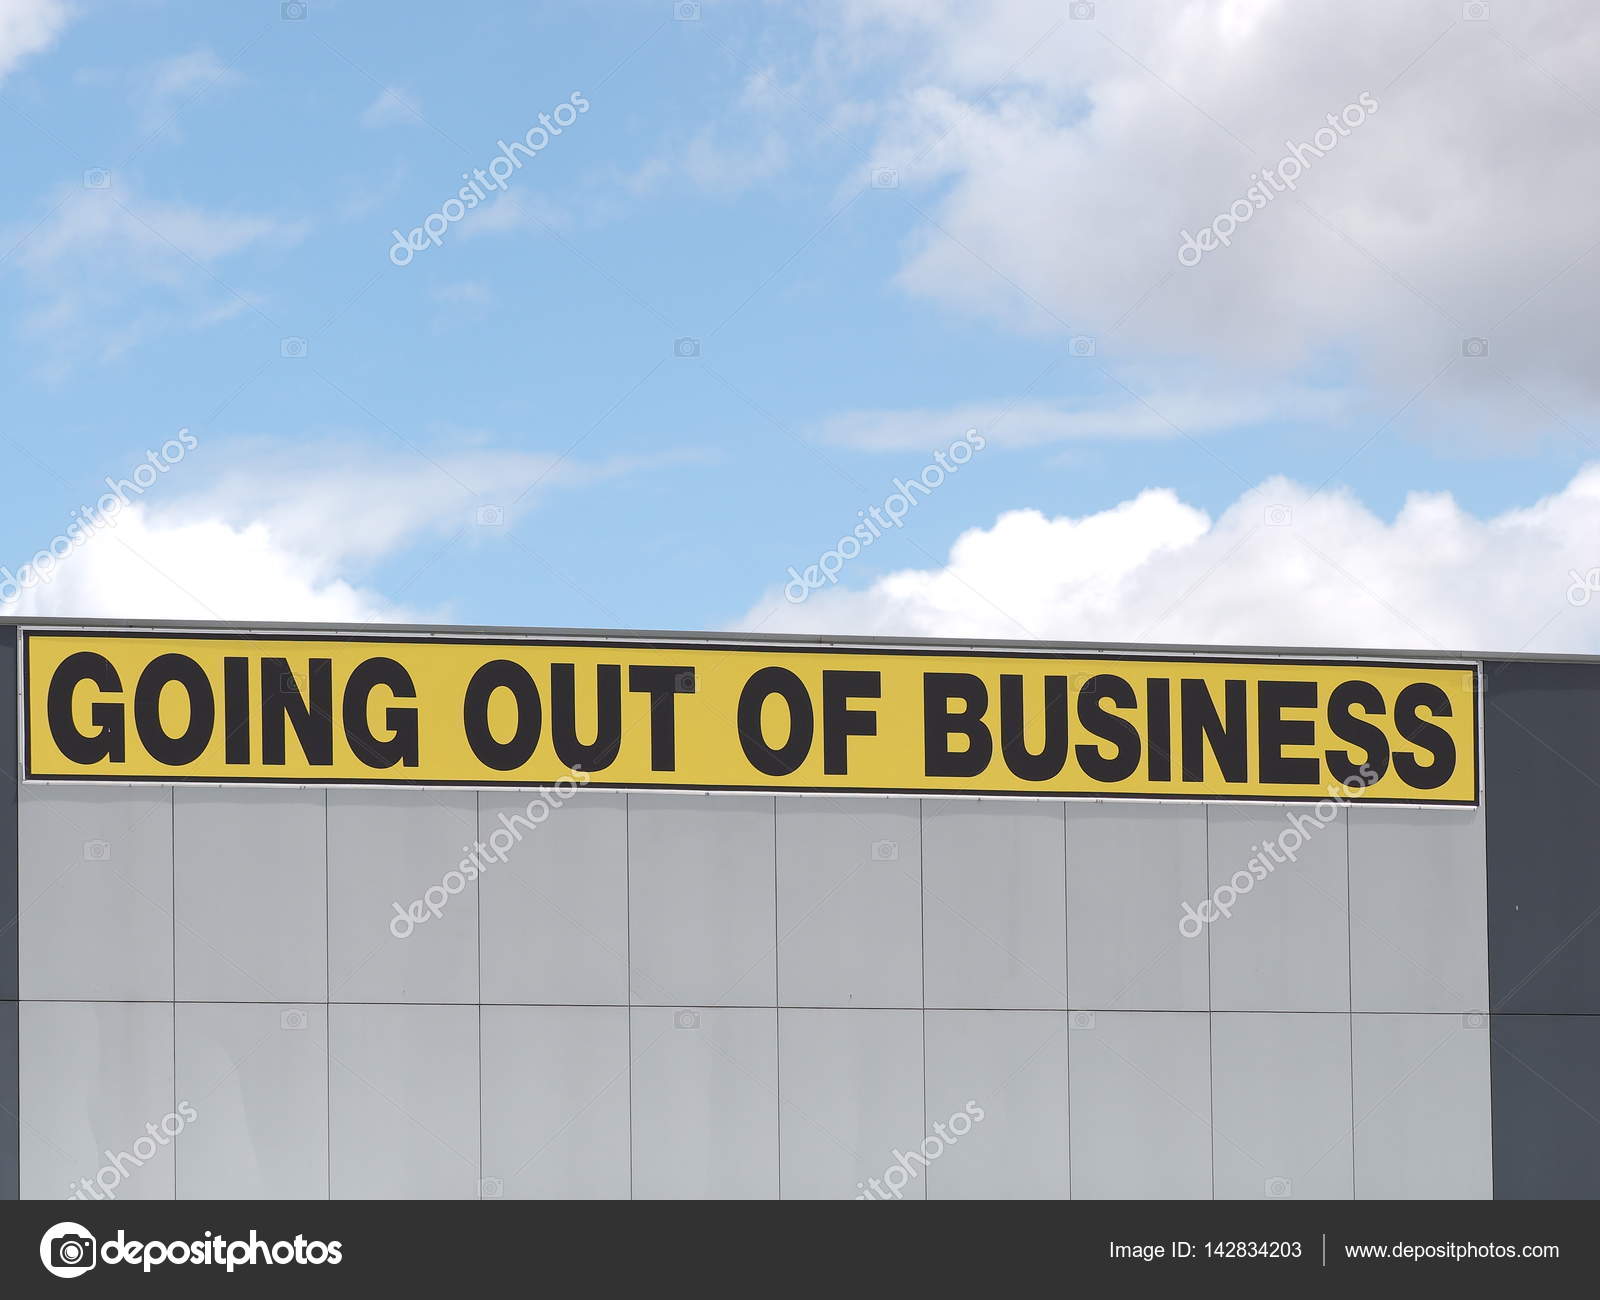 Going out of business sign — Stock Photo © Stringer_Image 142834203